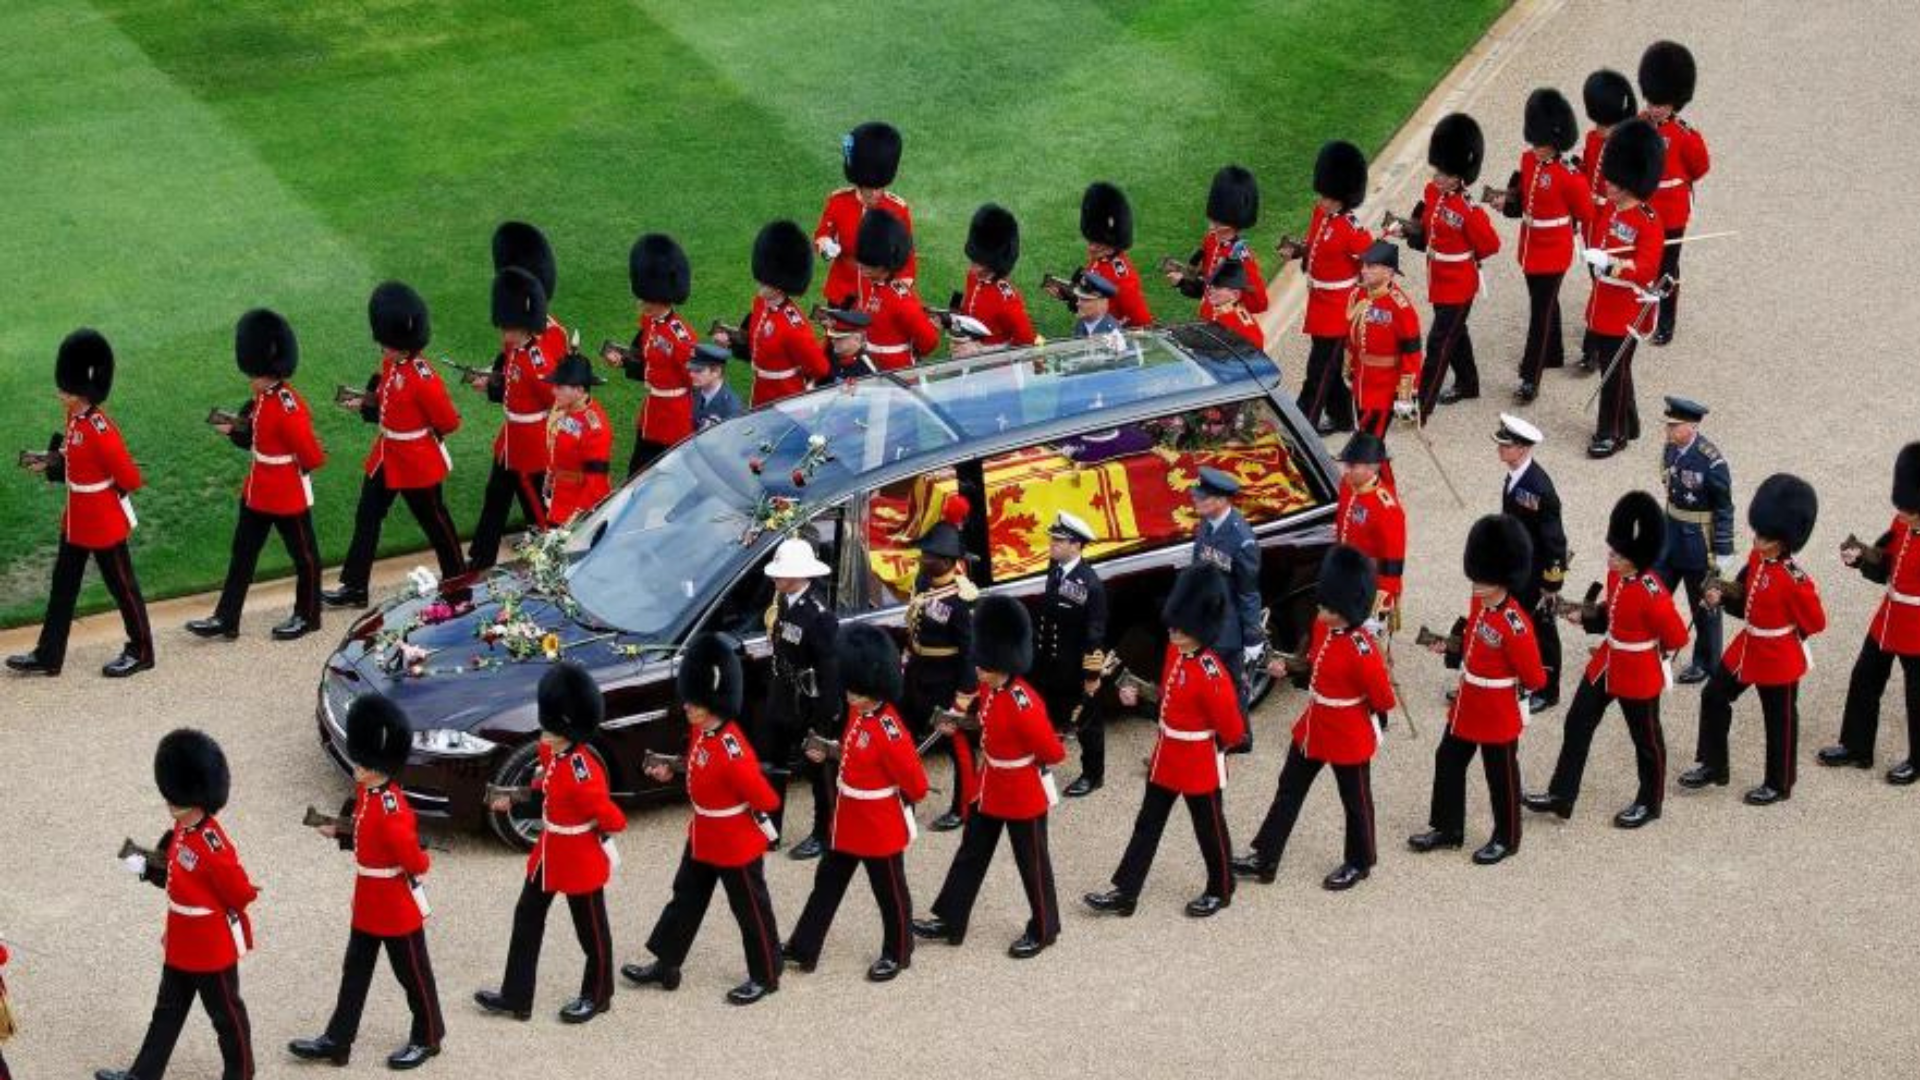 Palace guard marching with a black car with thq queen's casket